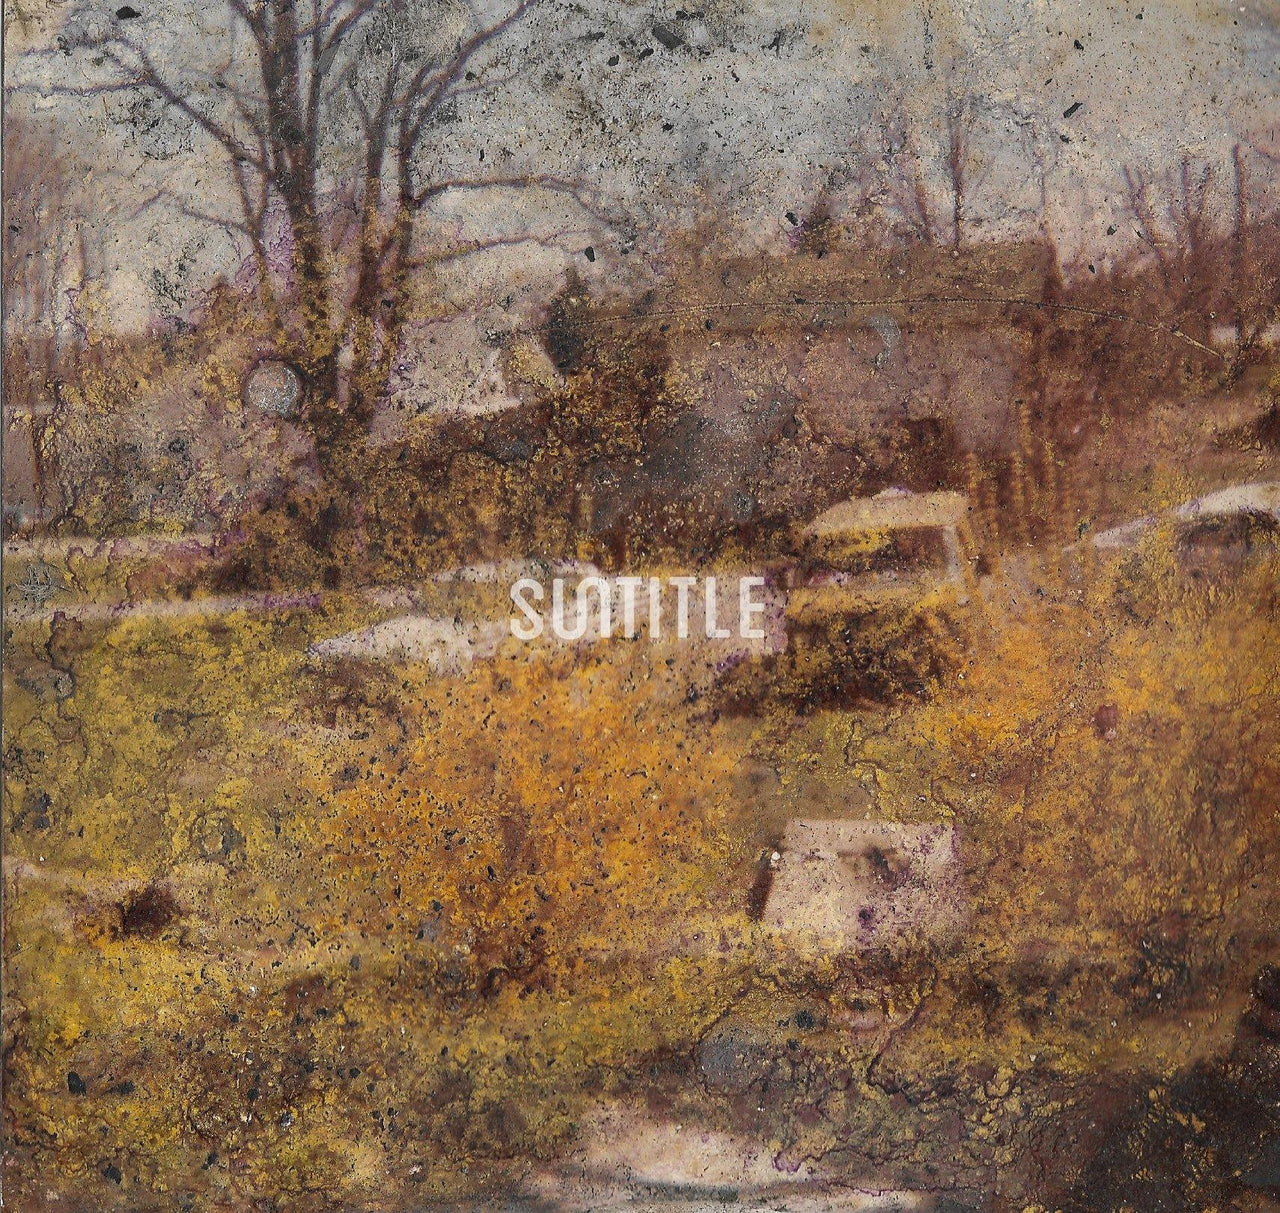 Buy – Suntitle "The Loss Of" Digital Download – Band & Music Merch – Cold Cuts Merch